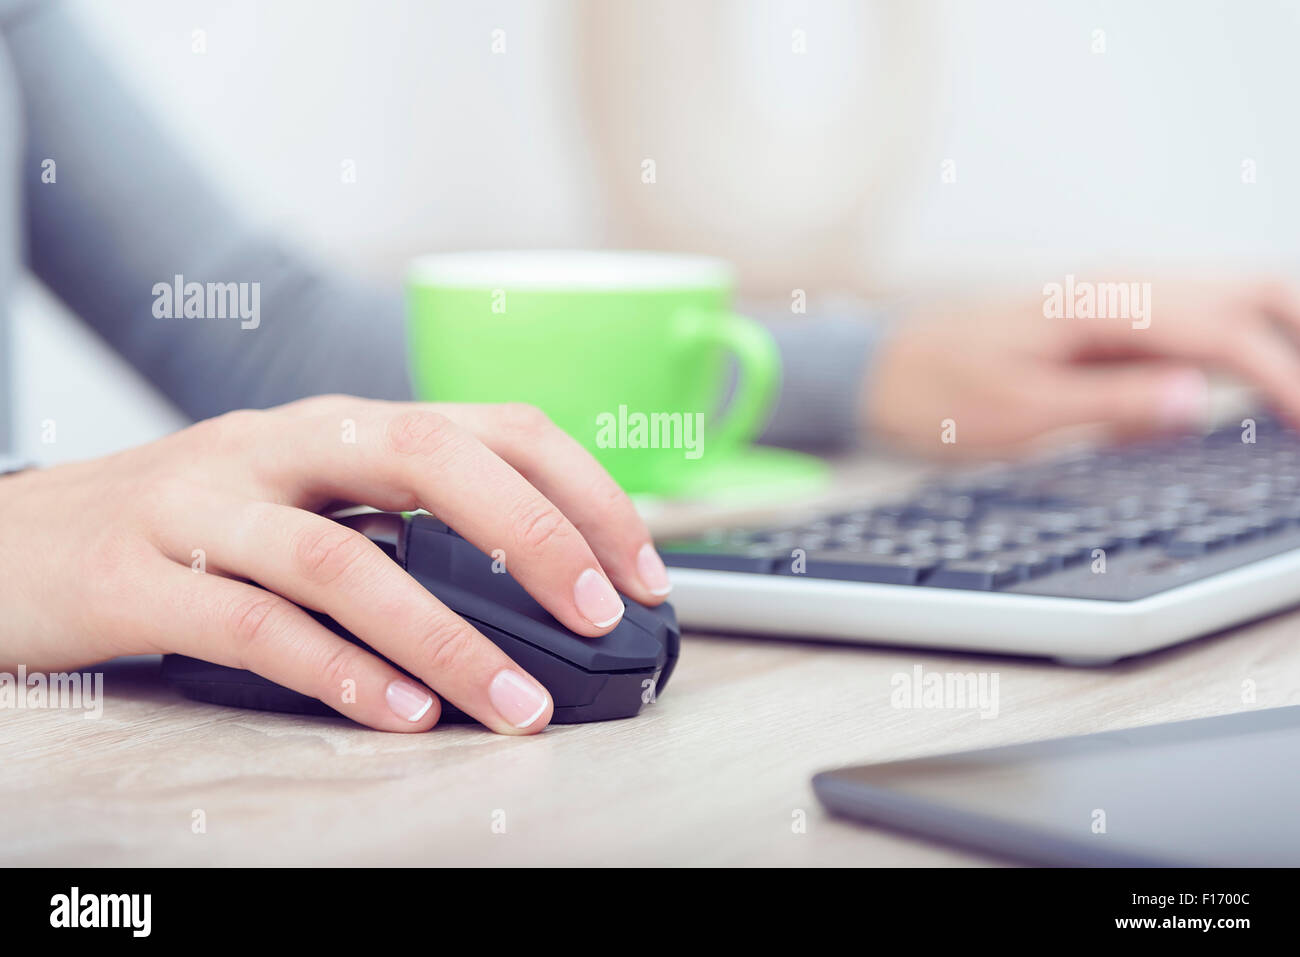 Woman's hands on a keyboard. Stock Photo